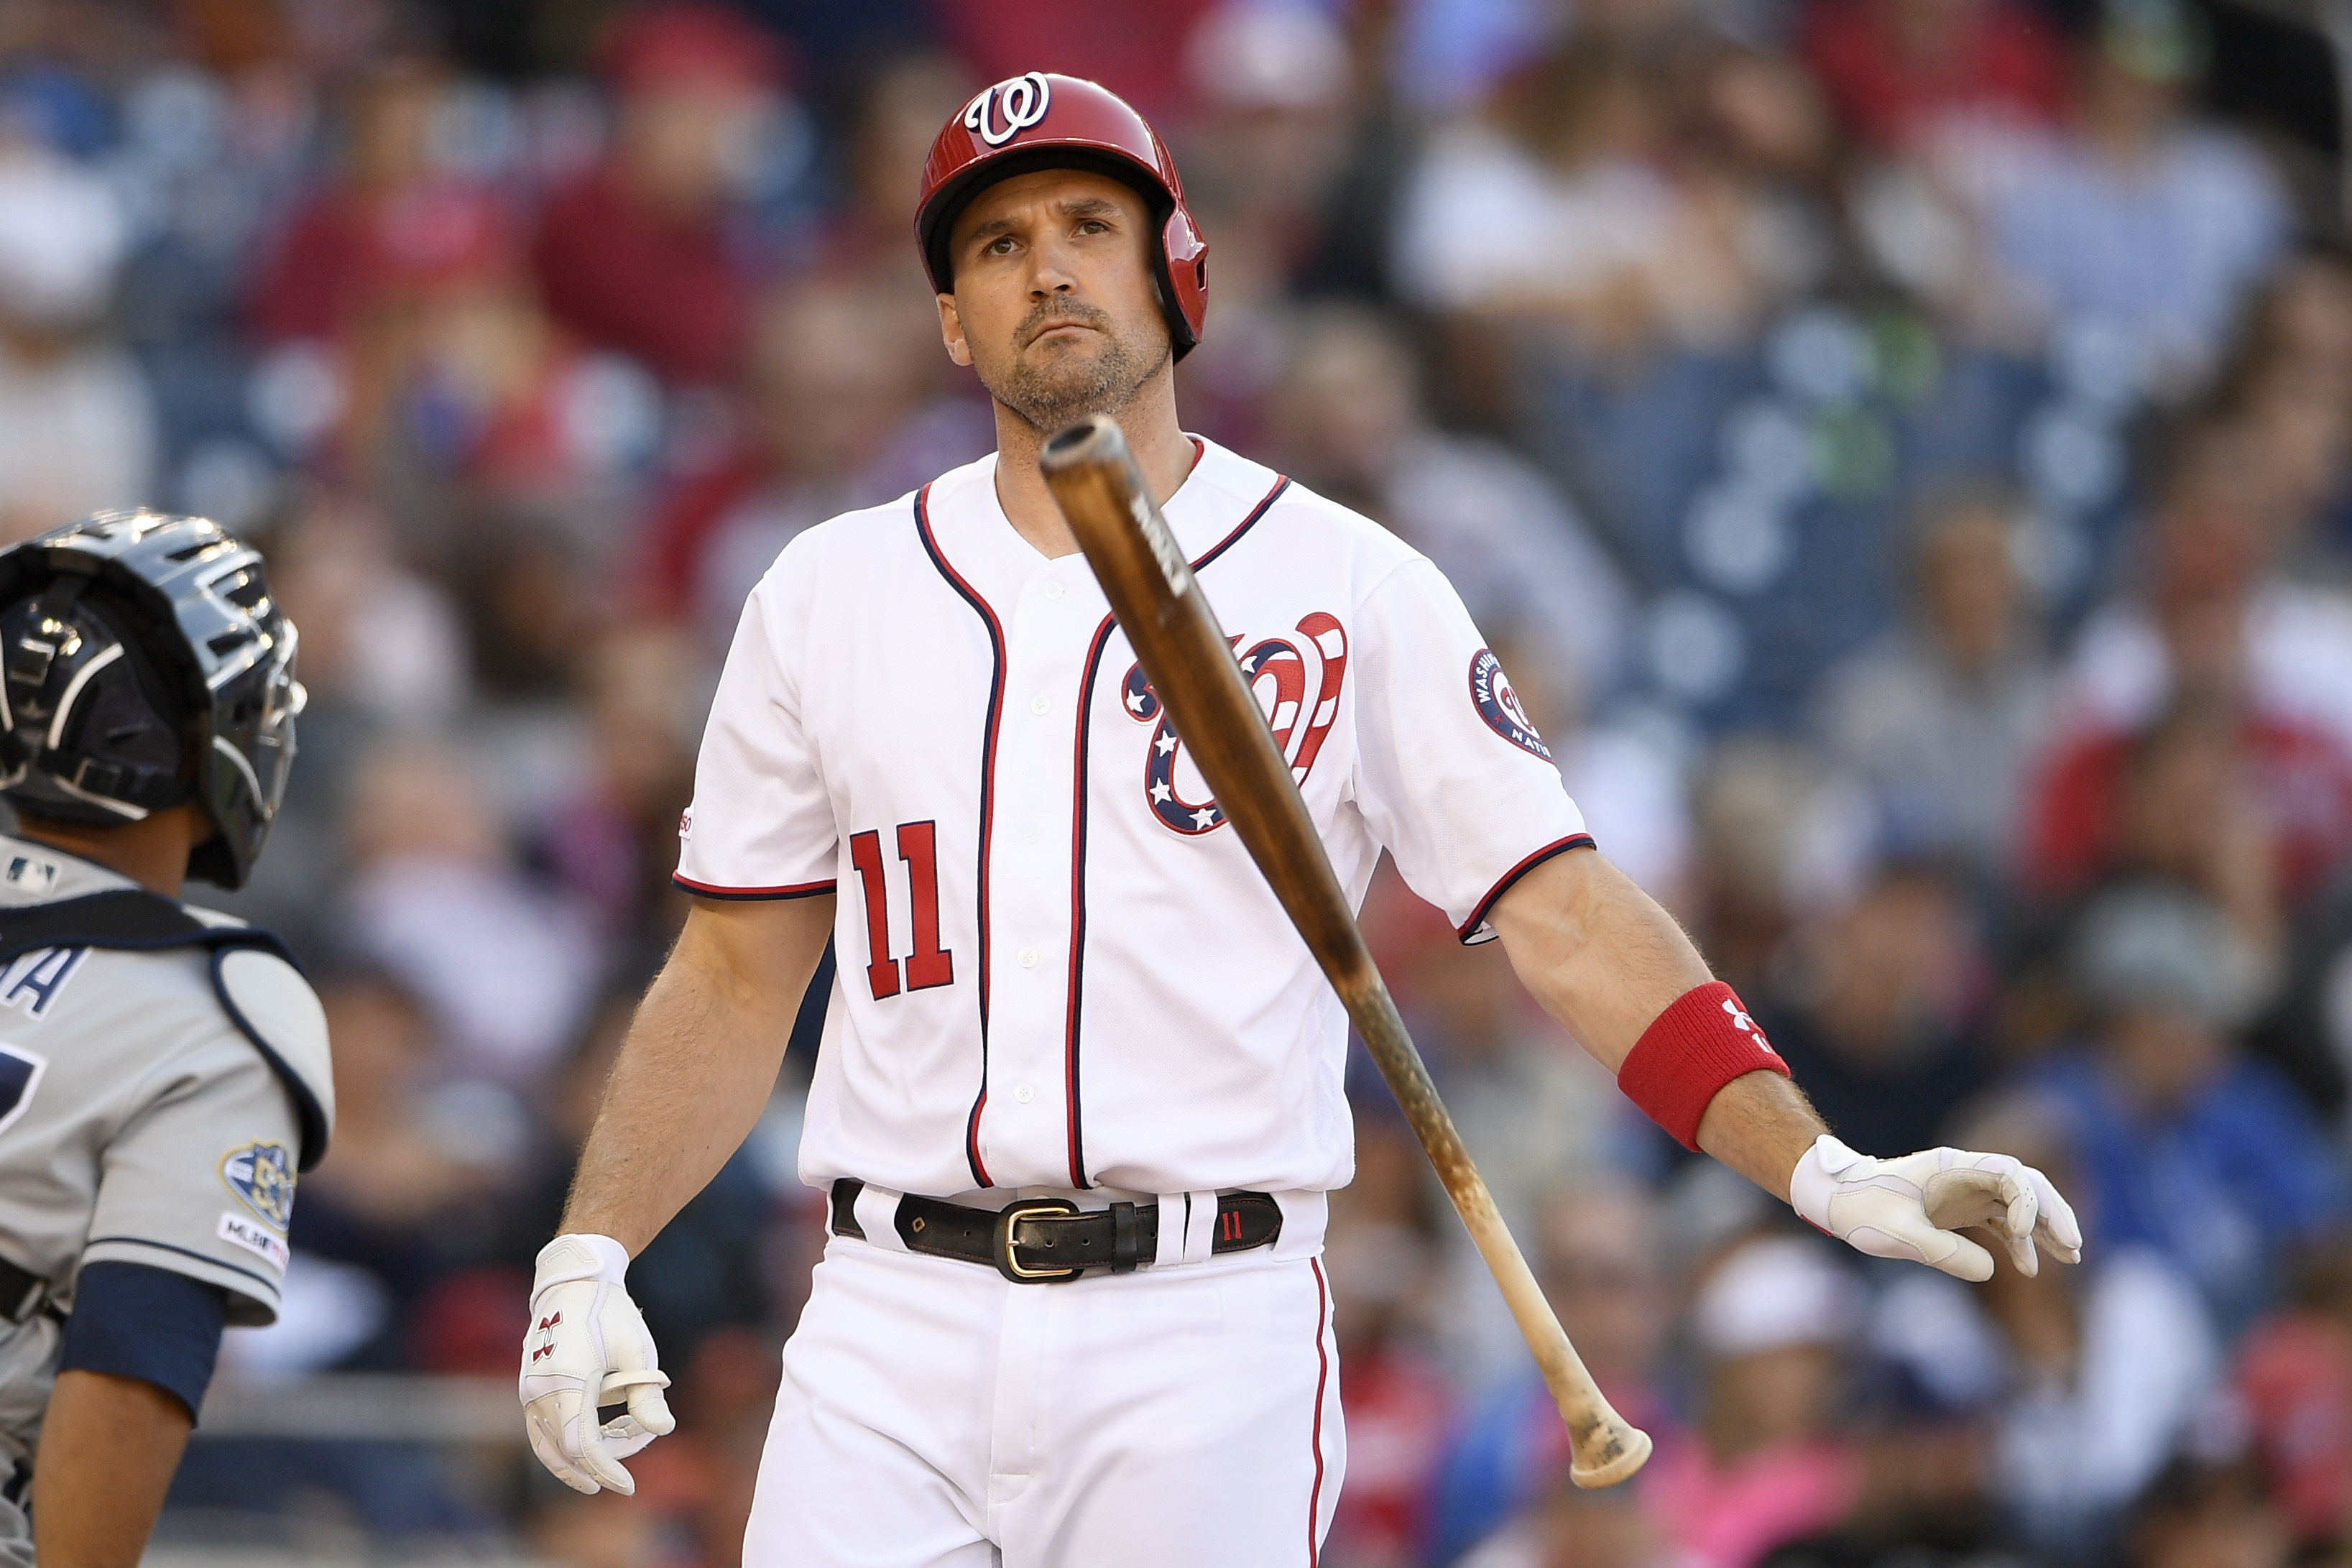 Nats' Zimmerman on injured list after hurting right foot